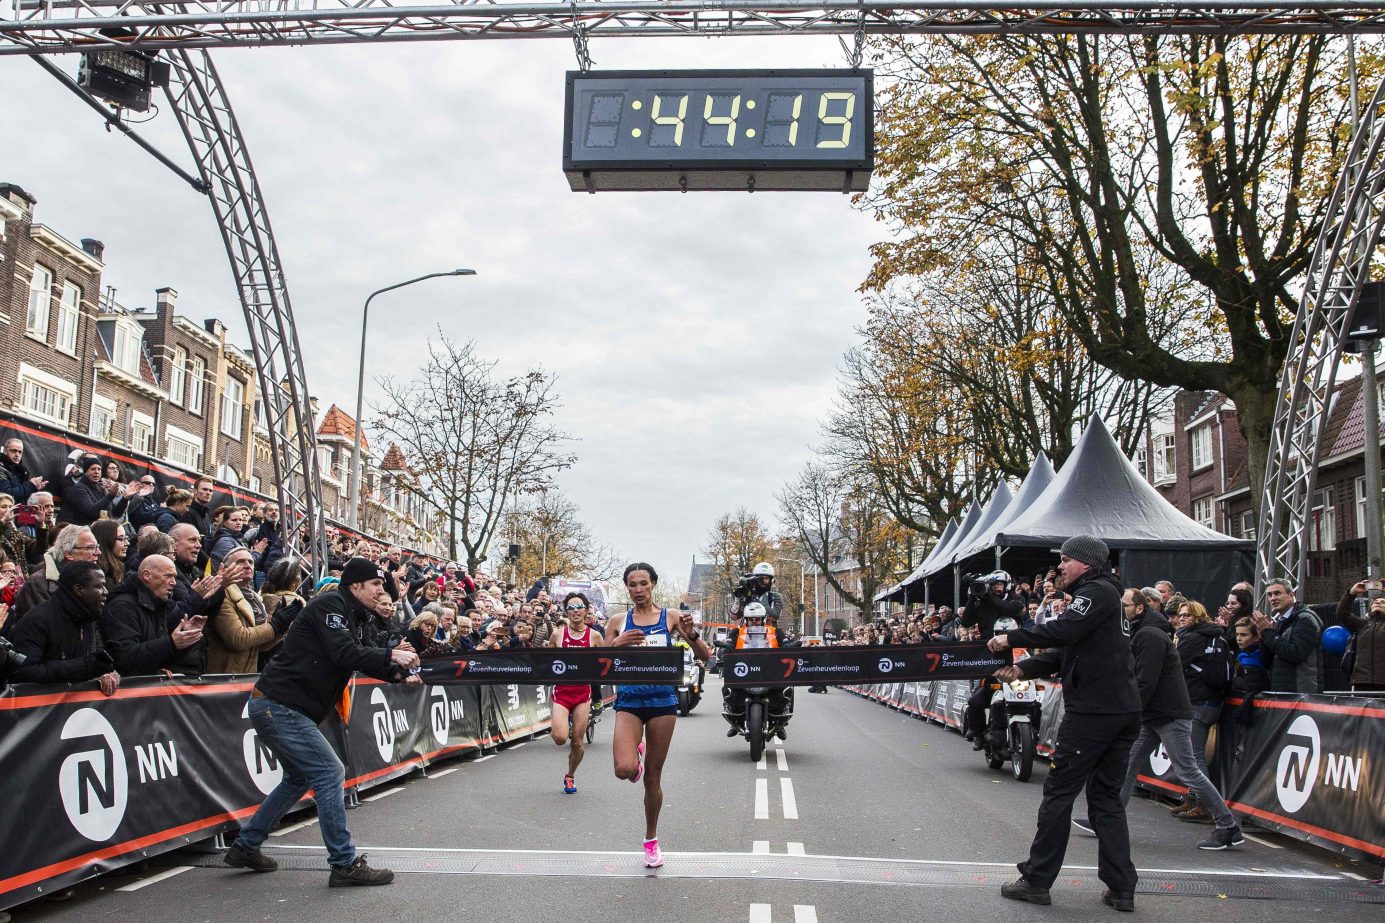 Ethiopian athlete Letesenbet Gidey crosses the finish line to win the Zevenheuvelenloop (Seven Hill Walk) race and broke the world record on the 15 kilometers, with a time of 44.20 minutes, In Nijmegen on November 17, 2019. (Photo by Vincent JANNINK / ANP / AFP) / Netherlands OUT